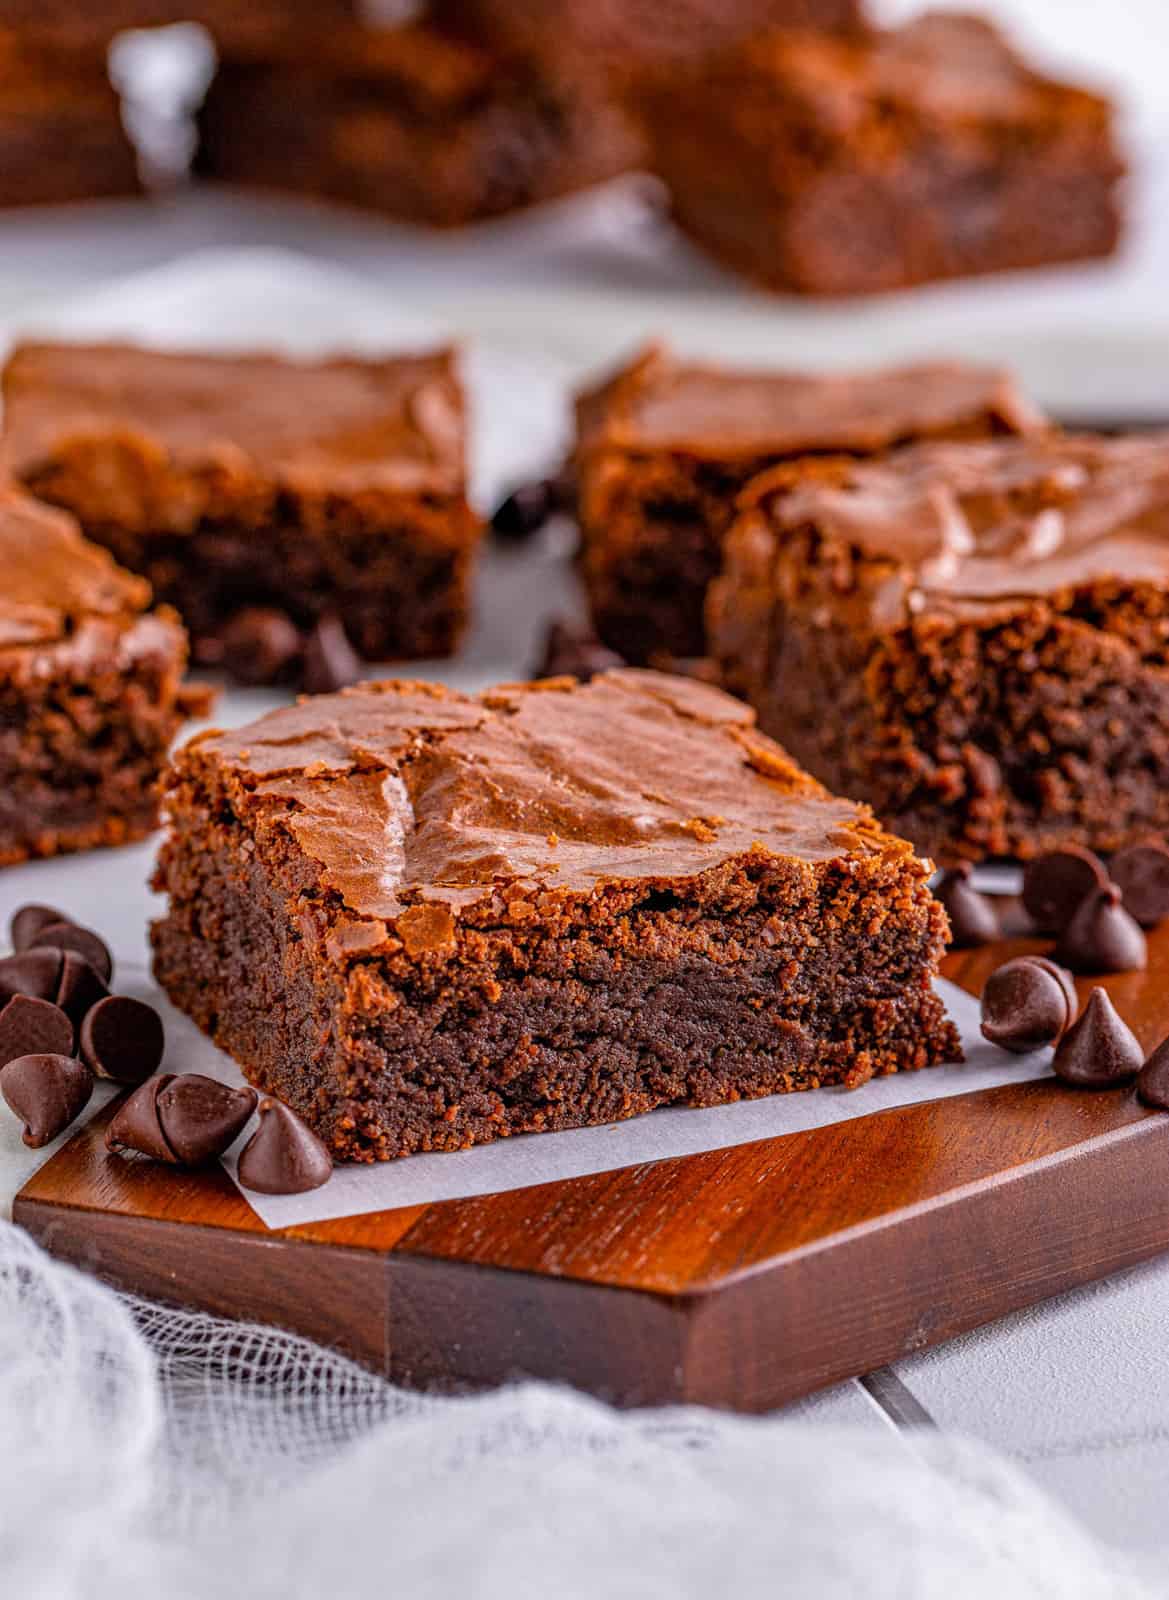 Fudge Brownies on parchment paper on wooden board.